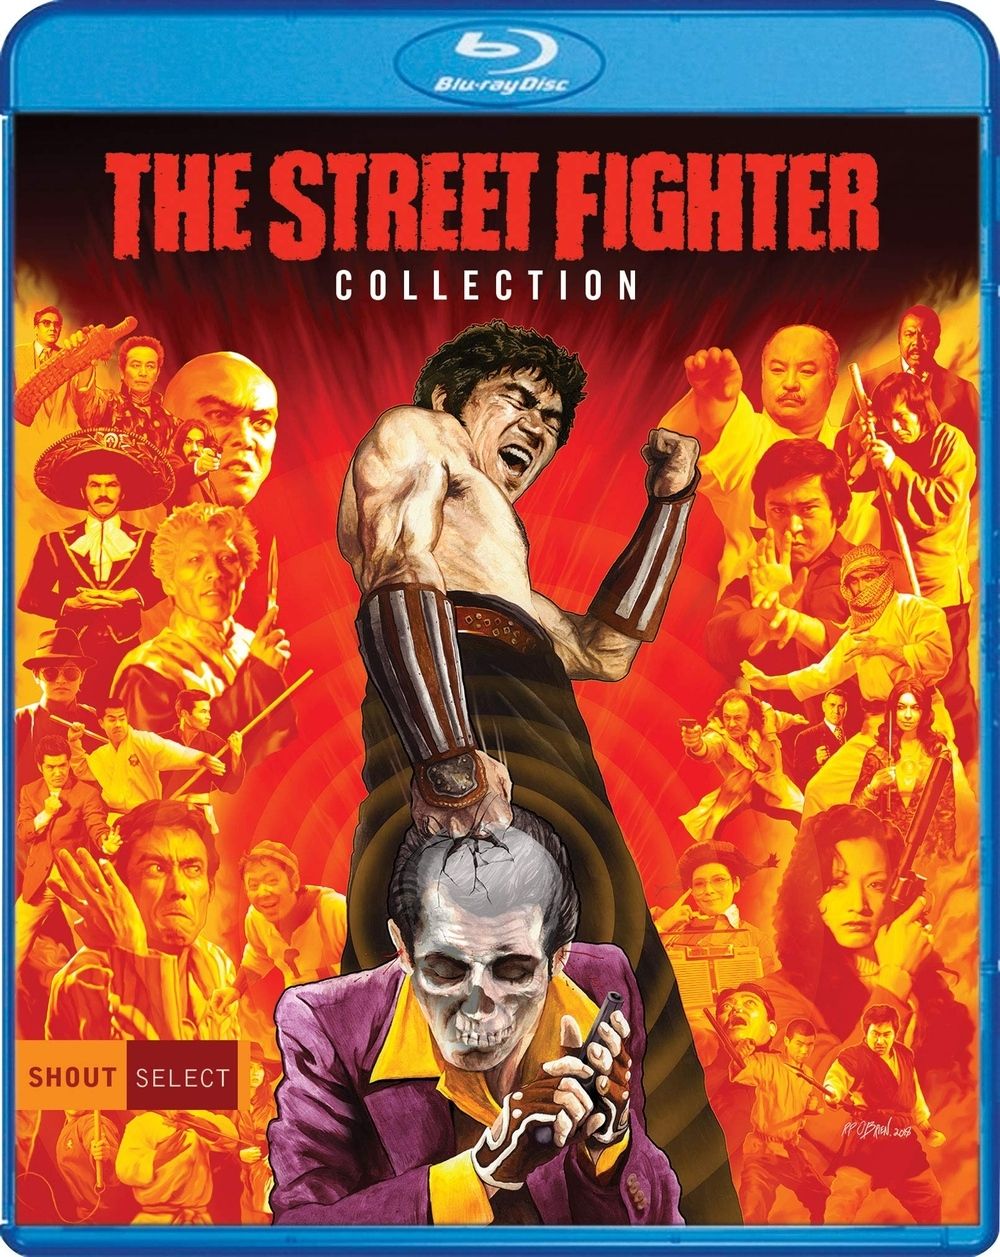 The Street Fighter Collection Blu-ray Art